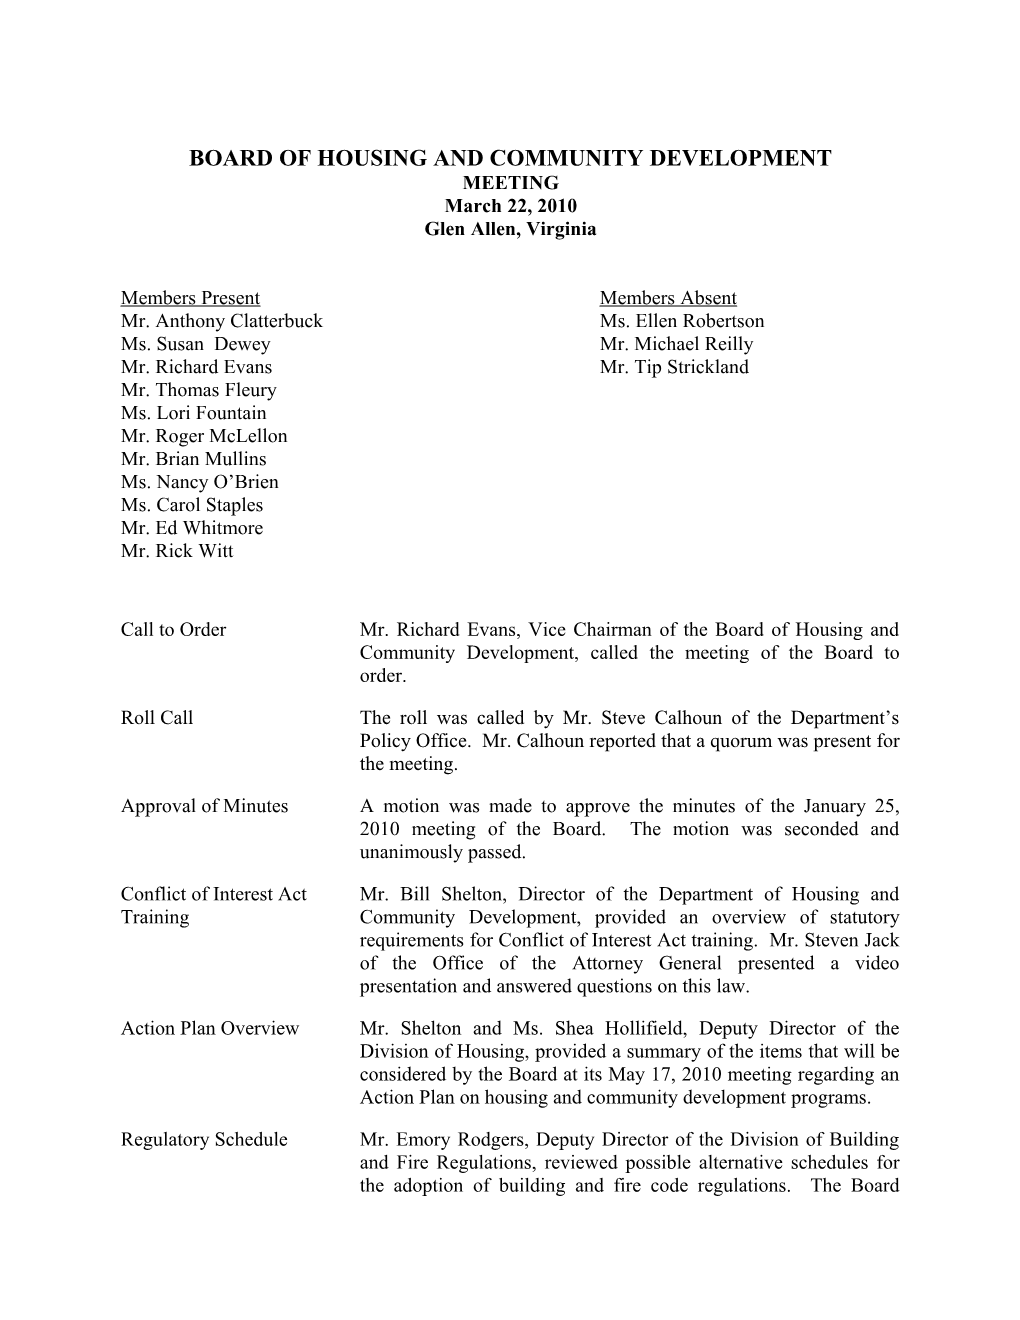 Board of Housing and Community Development s1